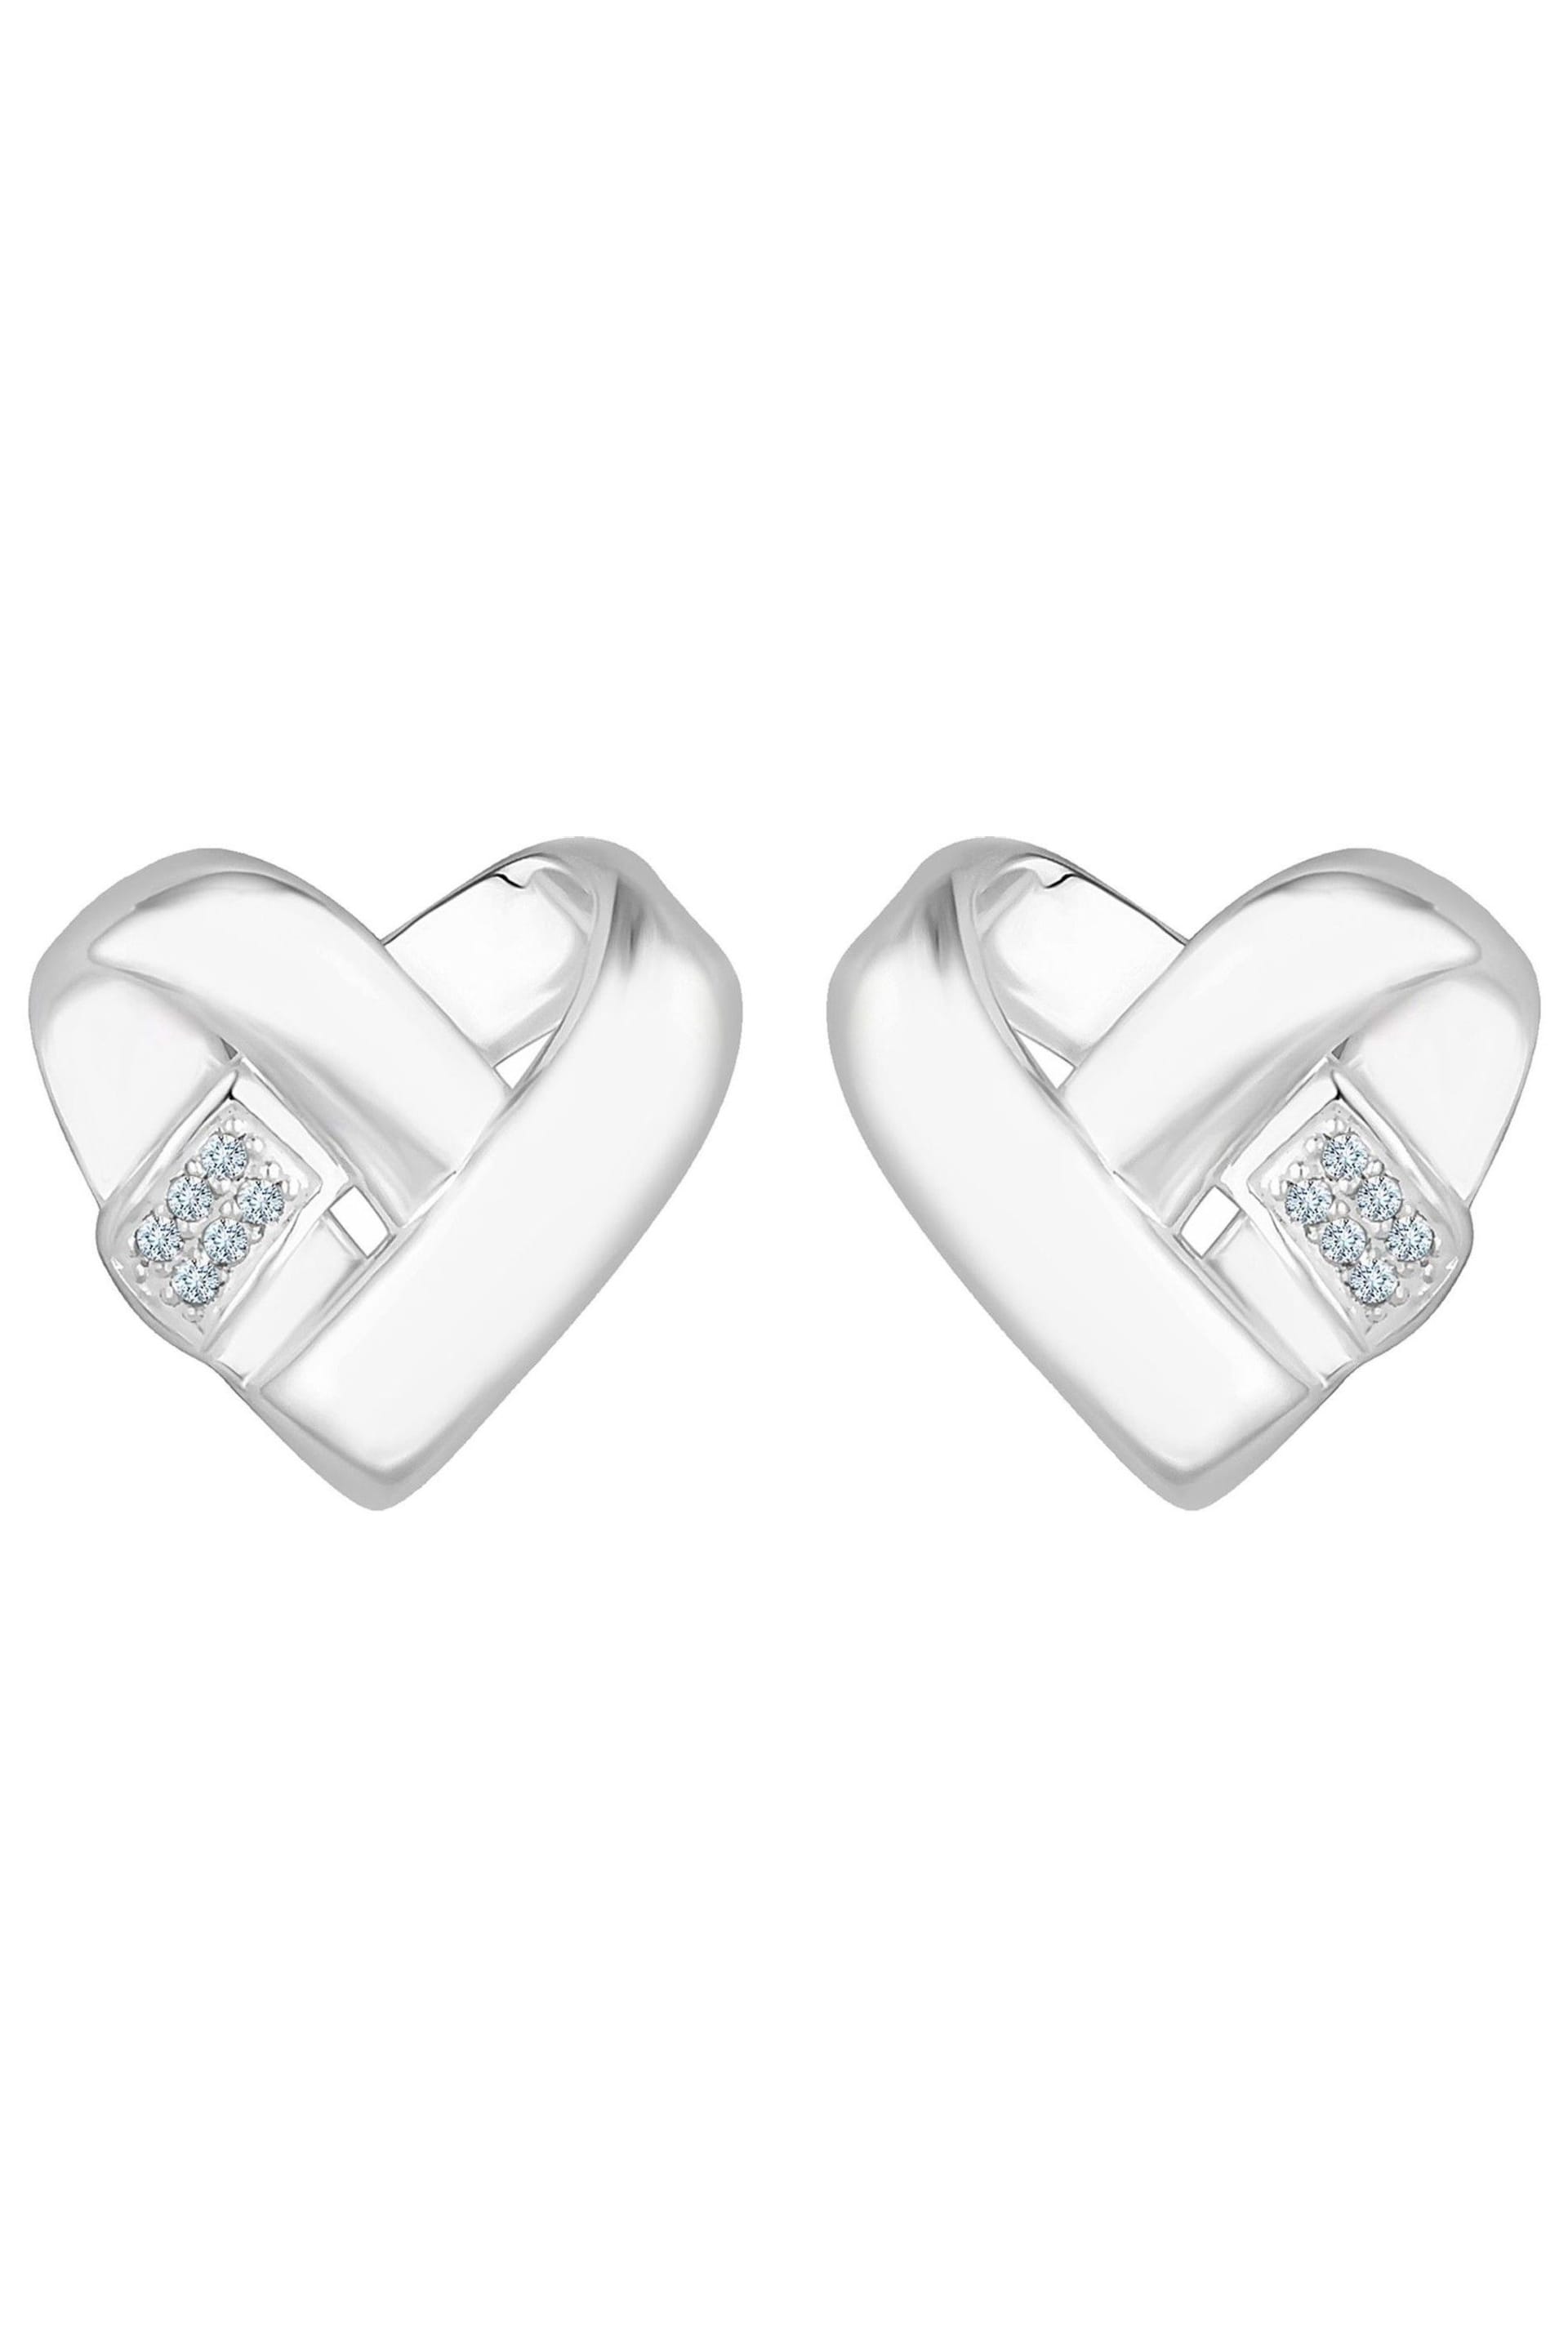 Simply Silver Silver Tone Knotted Heart Earrings - Image 2 of 3